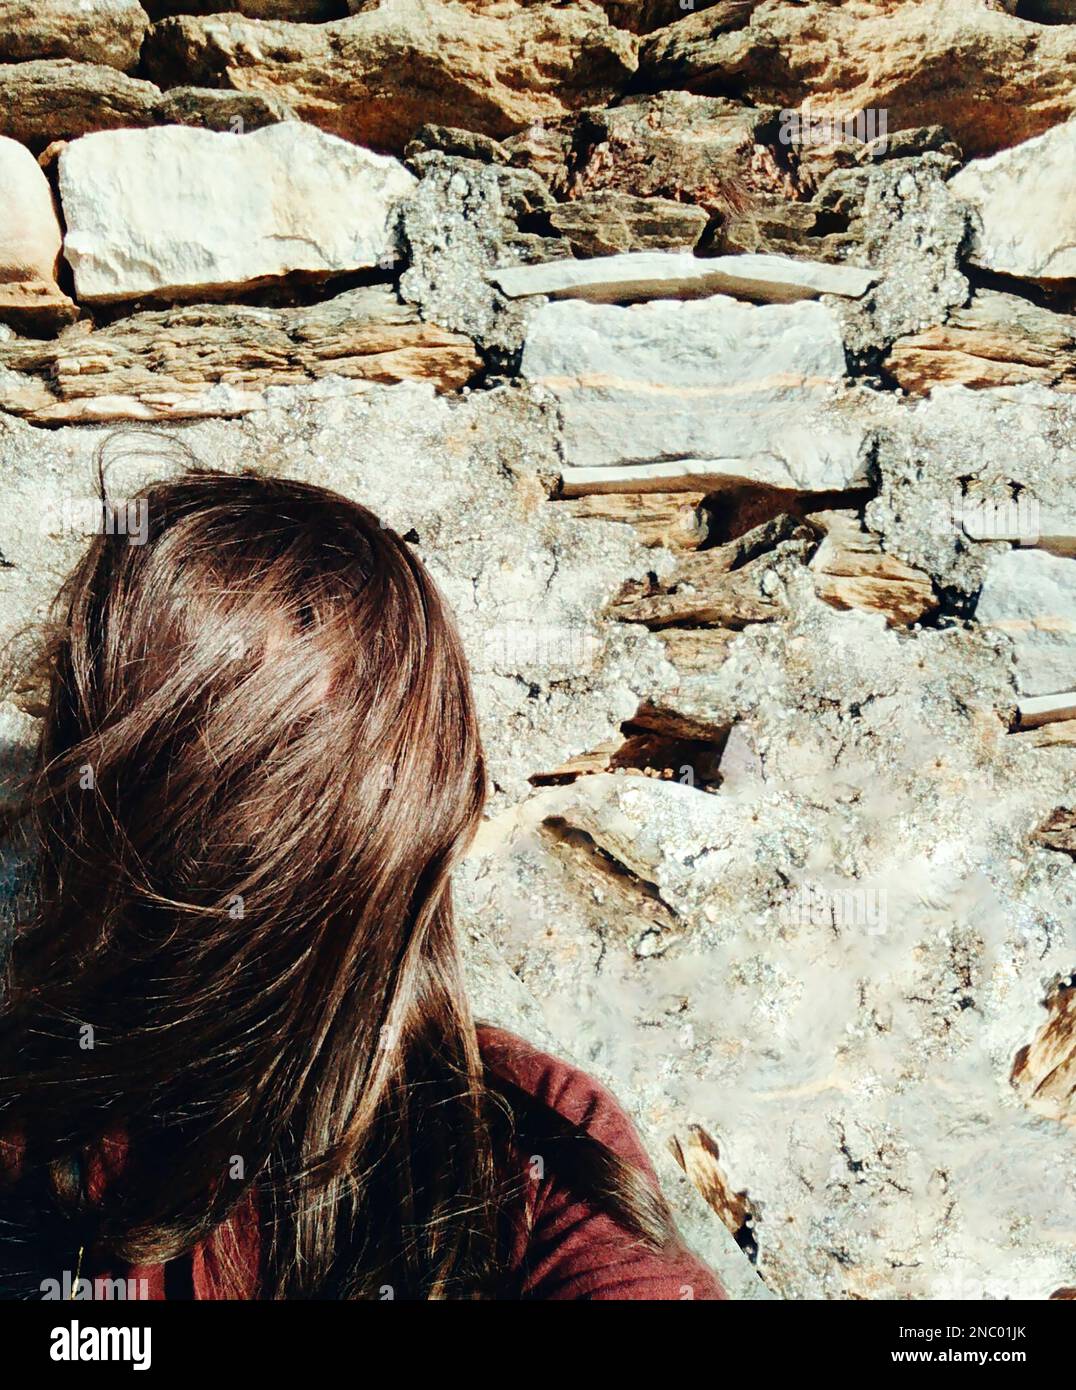 A woman stands on a rocky wall, hair covering or hiding her face Stock Photo